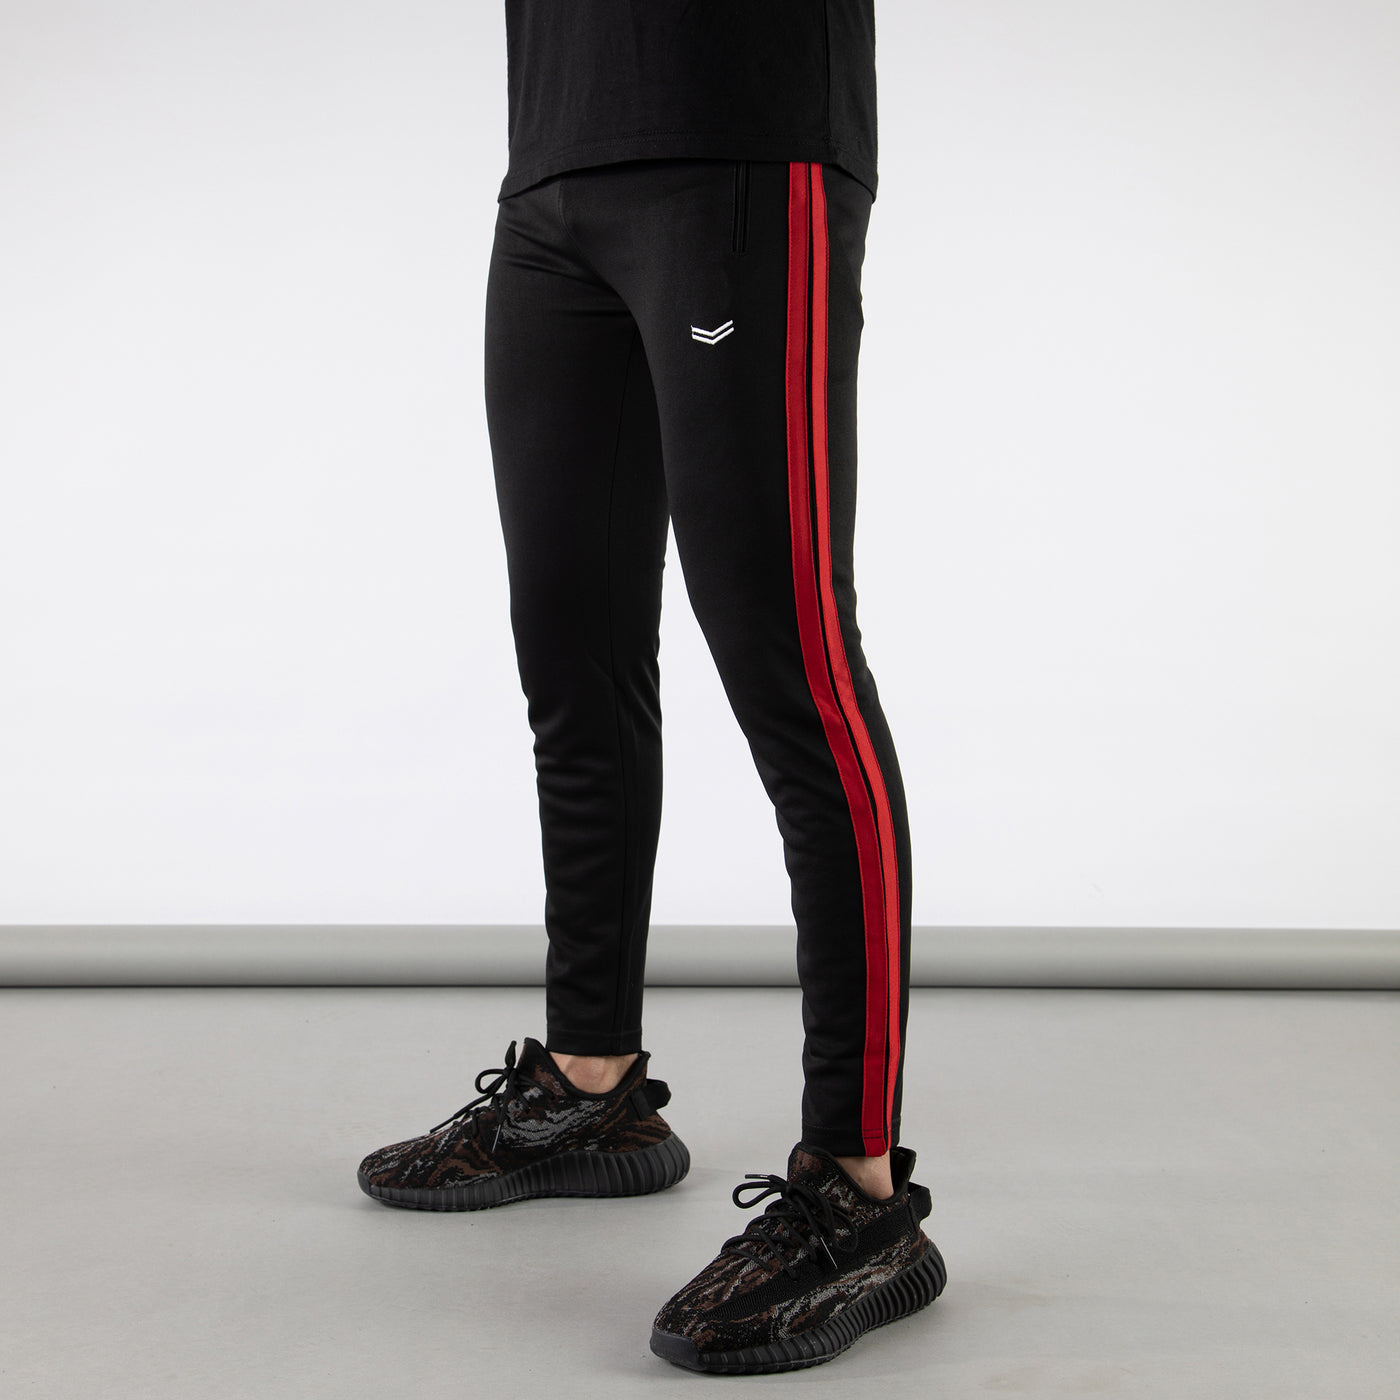 Black Quick Dry Bottoms with Two Narrow Red Stripes